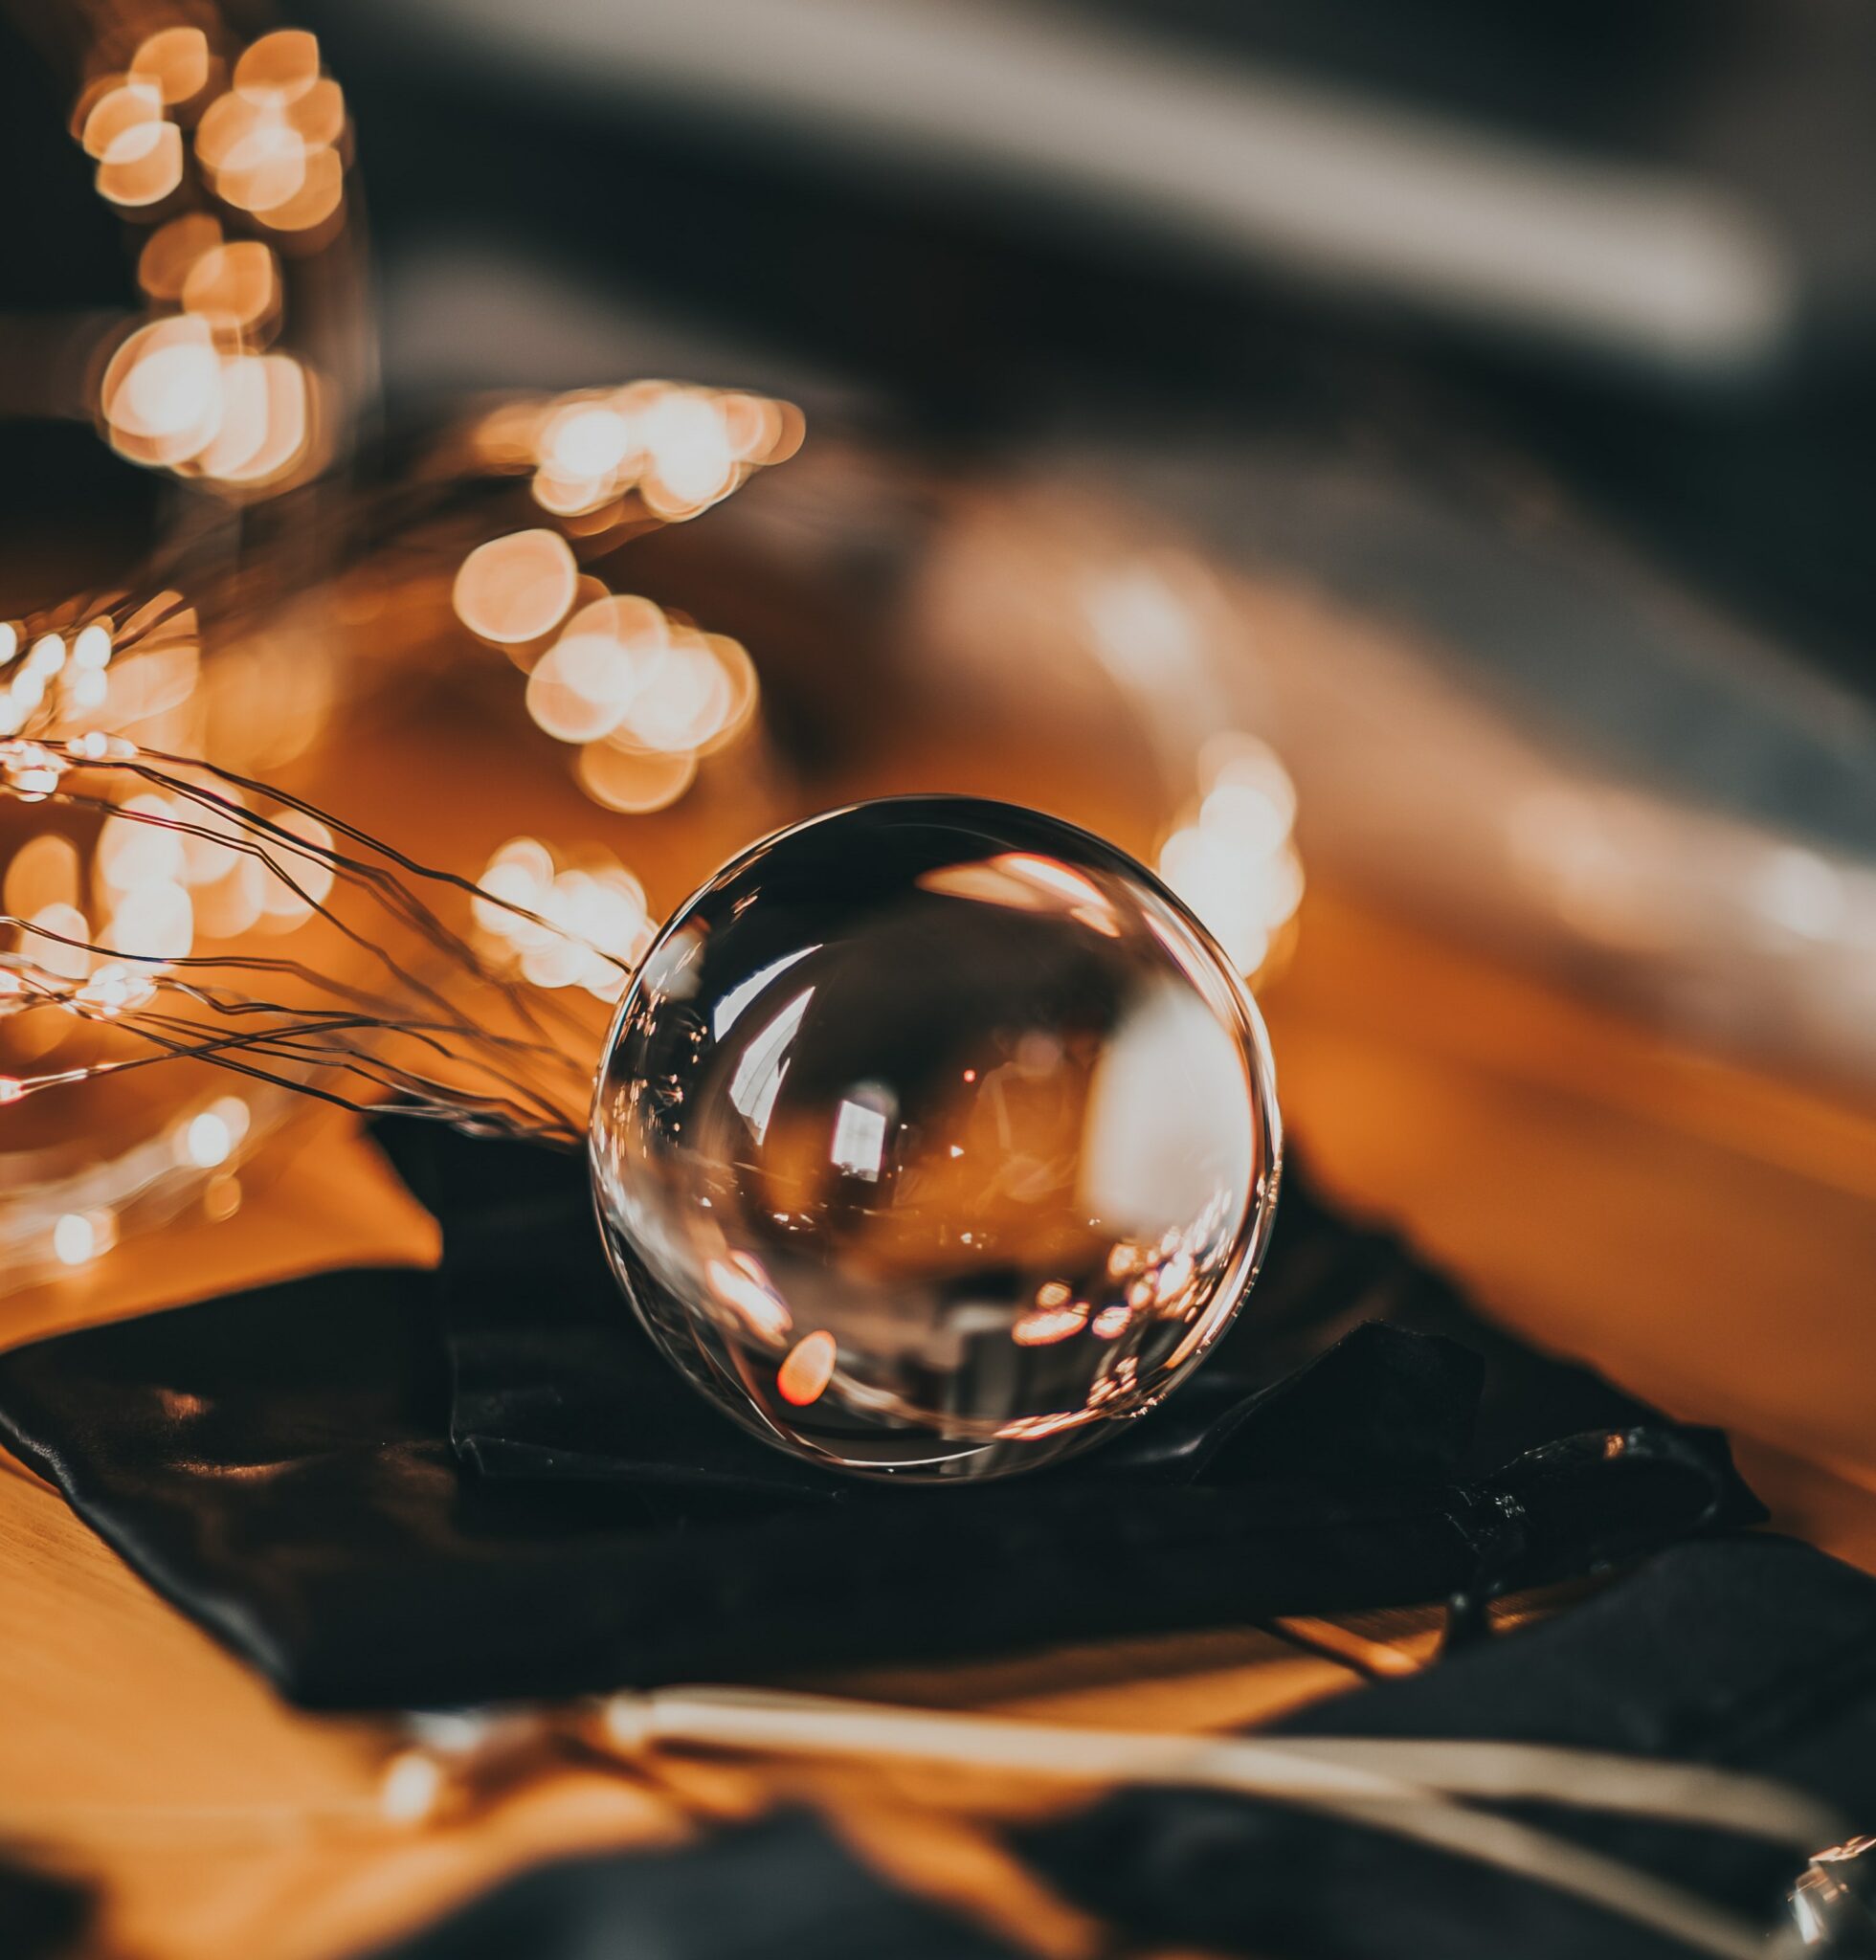 A glass Ben Wa ball in front of a string of yellow fairy lights.